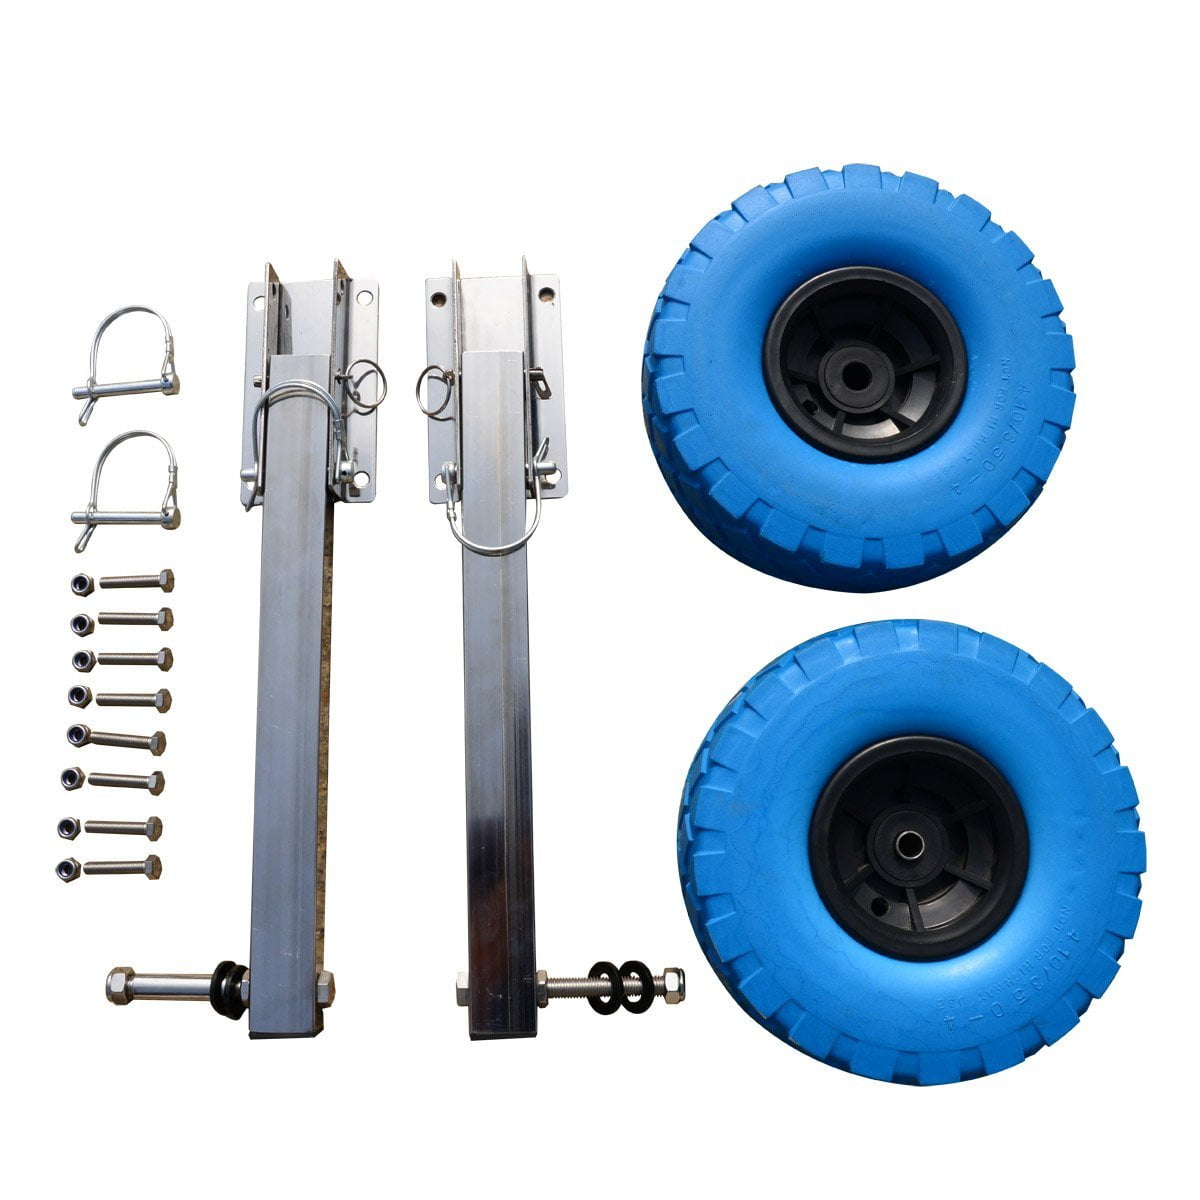 Details about   Boat Transom Launching Wheel Dolly Stainless Steel For Inflatable Boat,Dinghy 